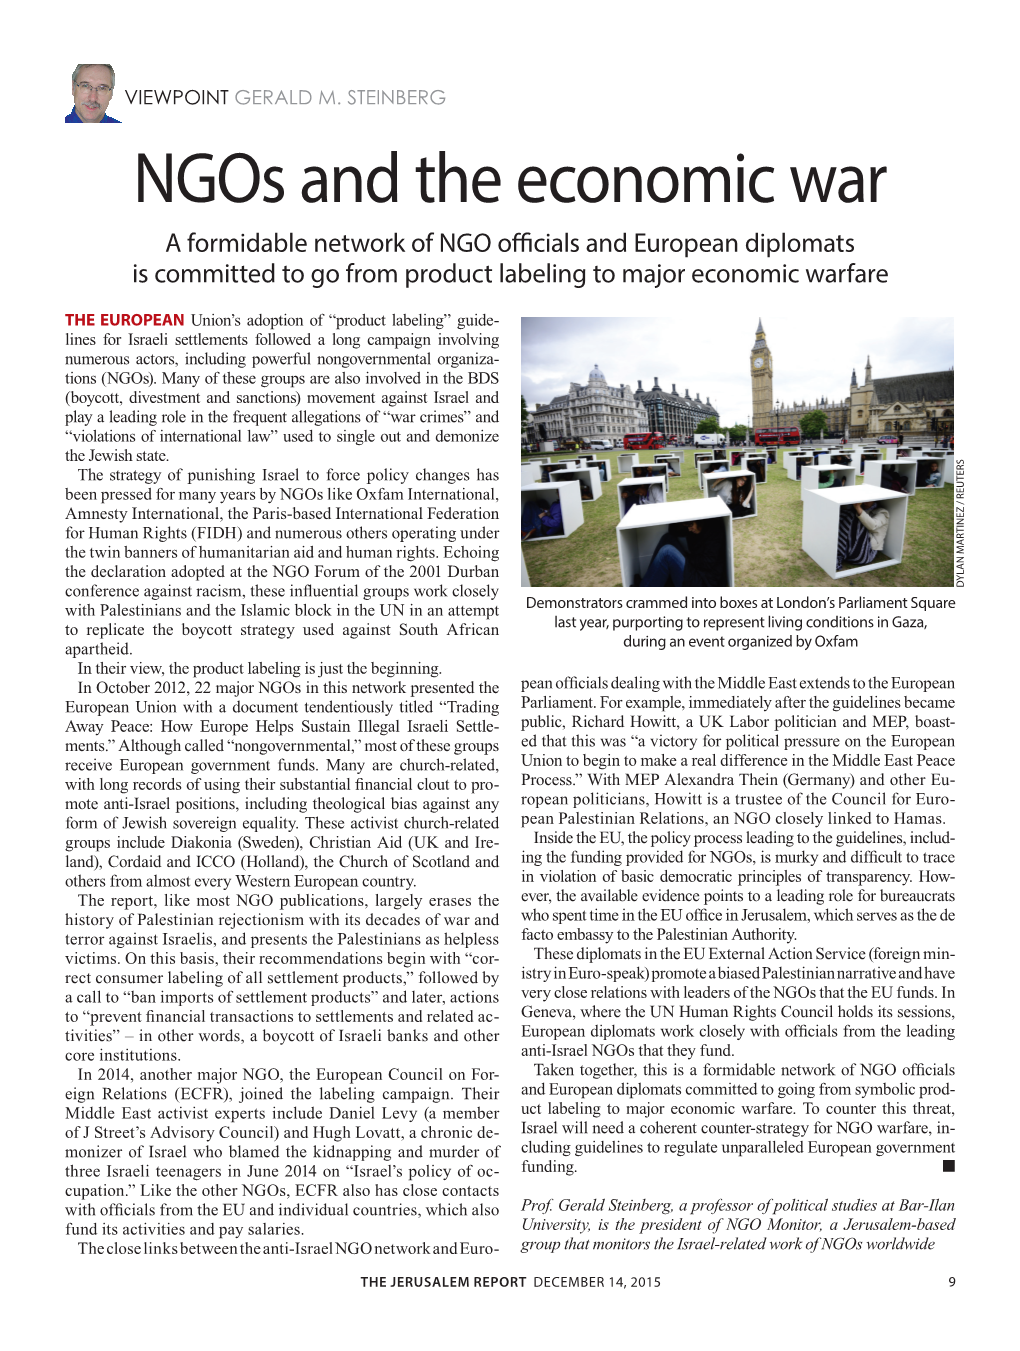 Ngos and the Economic War a Formidable Network of NGO Officials and European Diplomats Is Committed to Go from Product Labeling to Major Economic Warfare